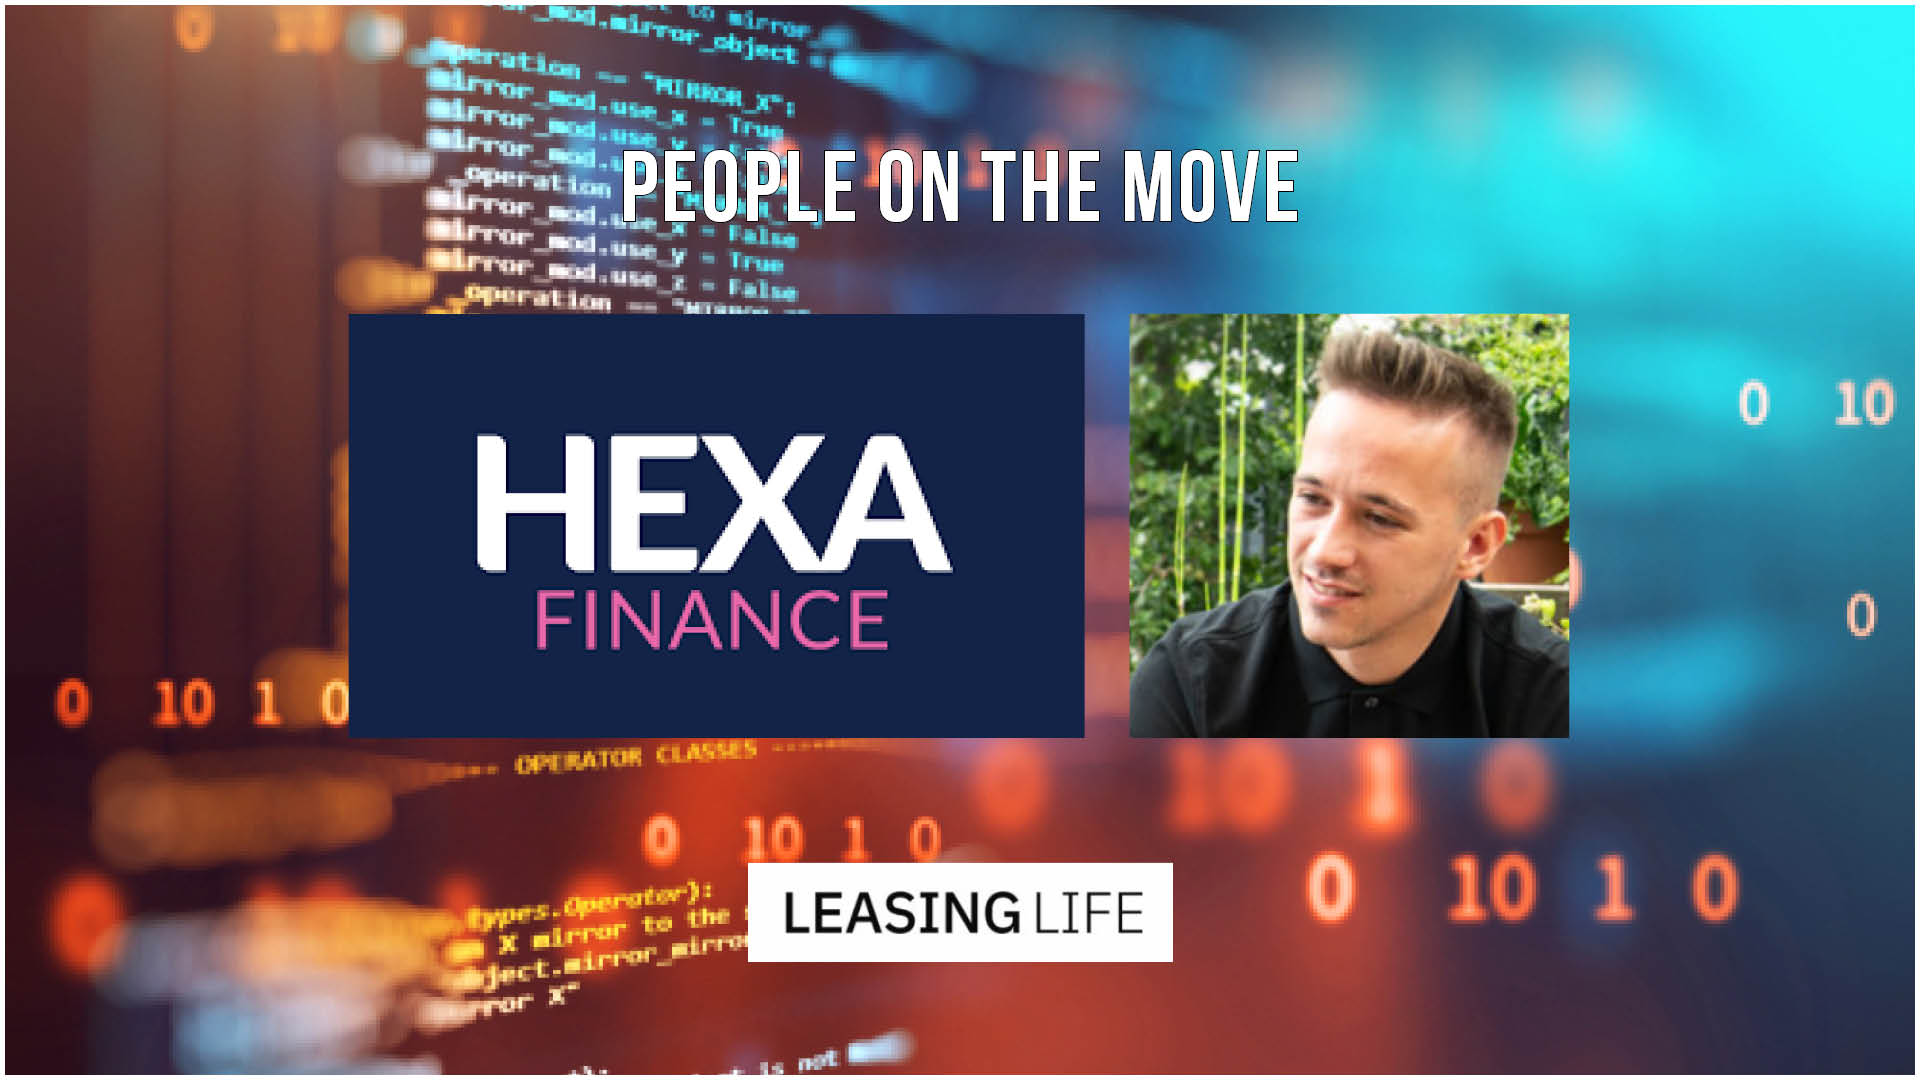 Hexa Finance appoints associate director to newly created role